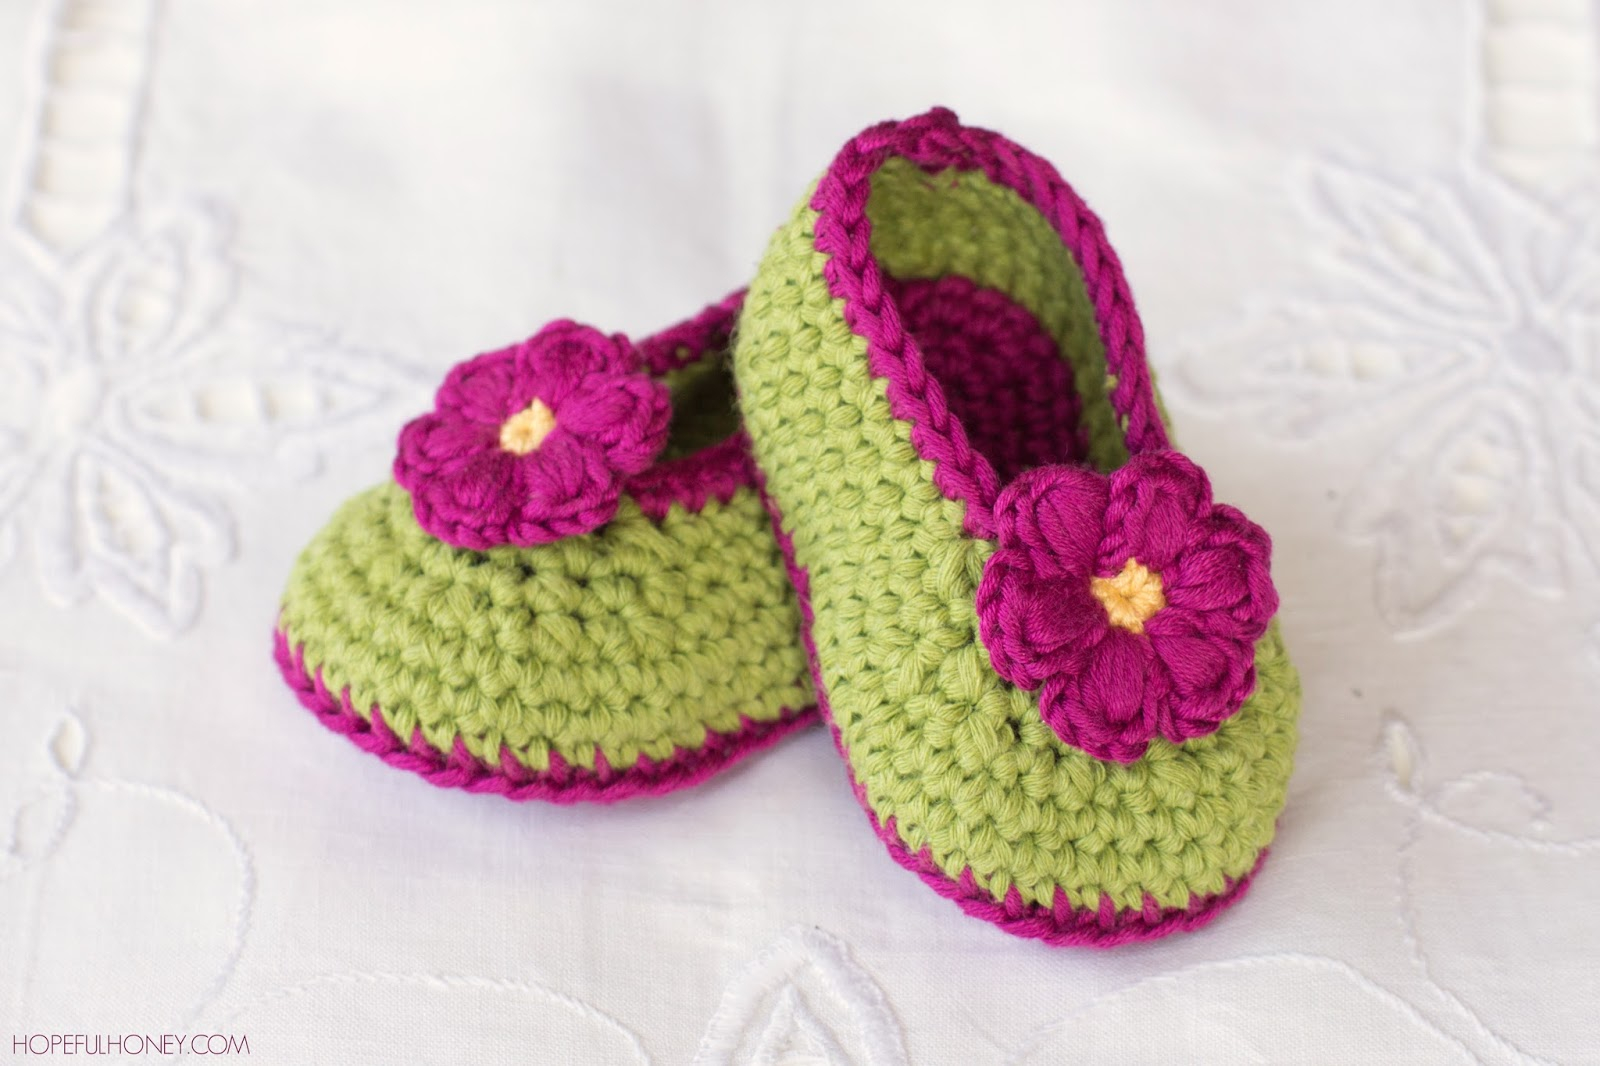 Crochet Baby Booties Pattern Easy To Make Crochet Booties Crochet And Knitting Patterns 2019